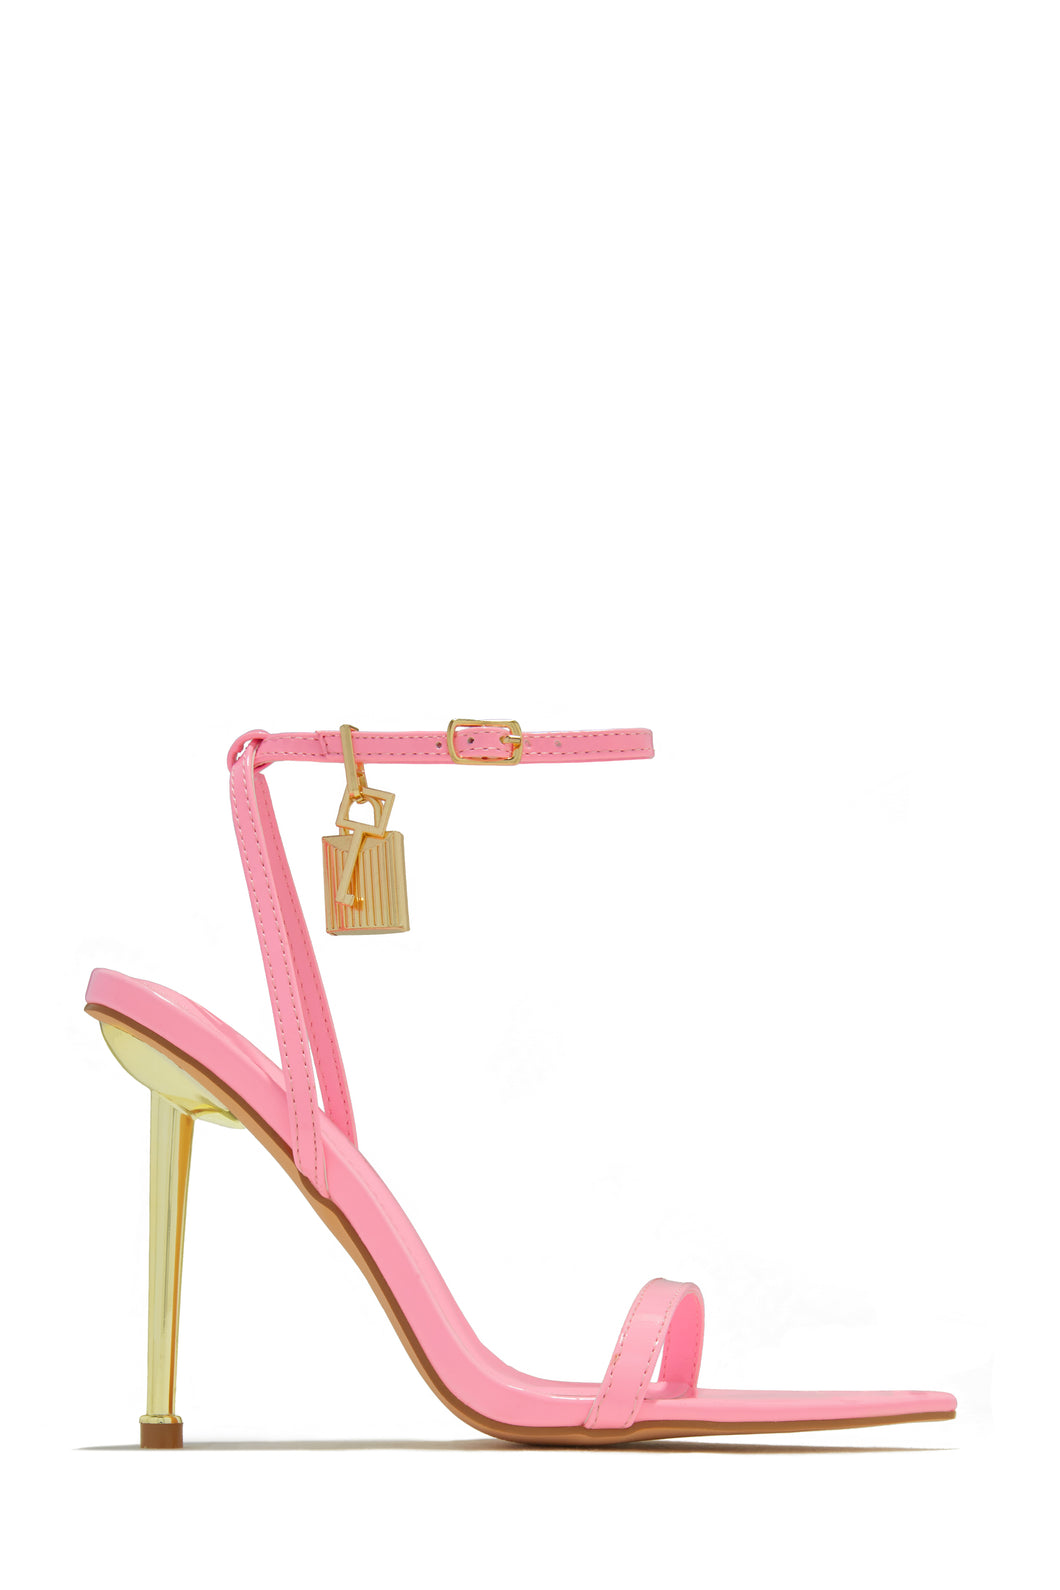 Pink Single Sole High Heels with Gold-Tone Lock & Key Pendant